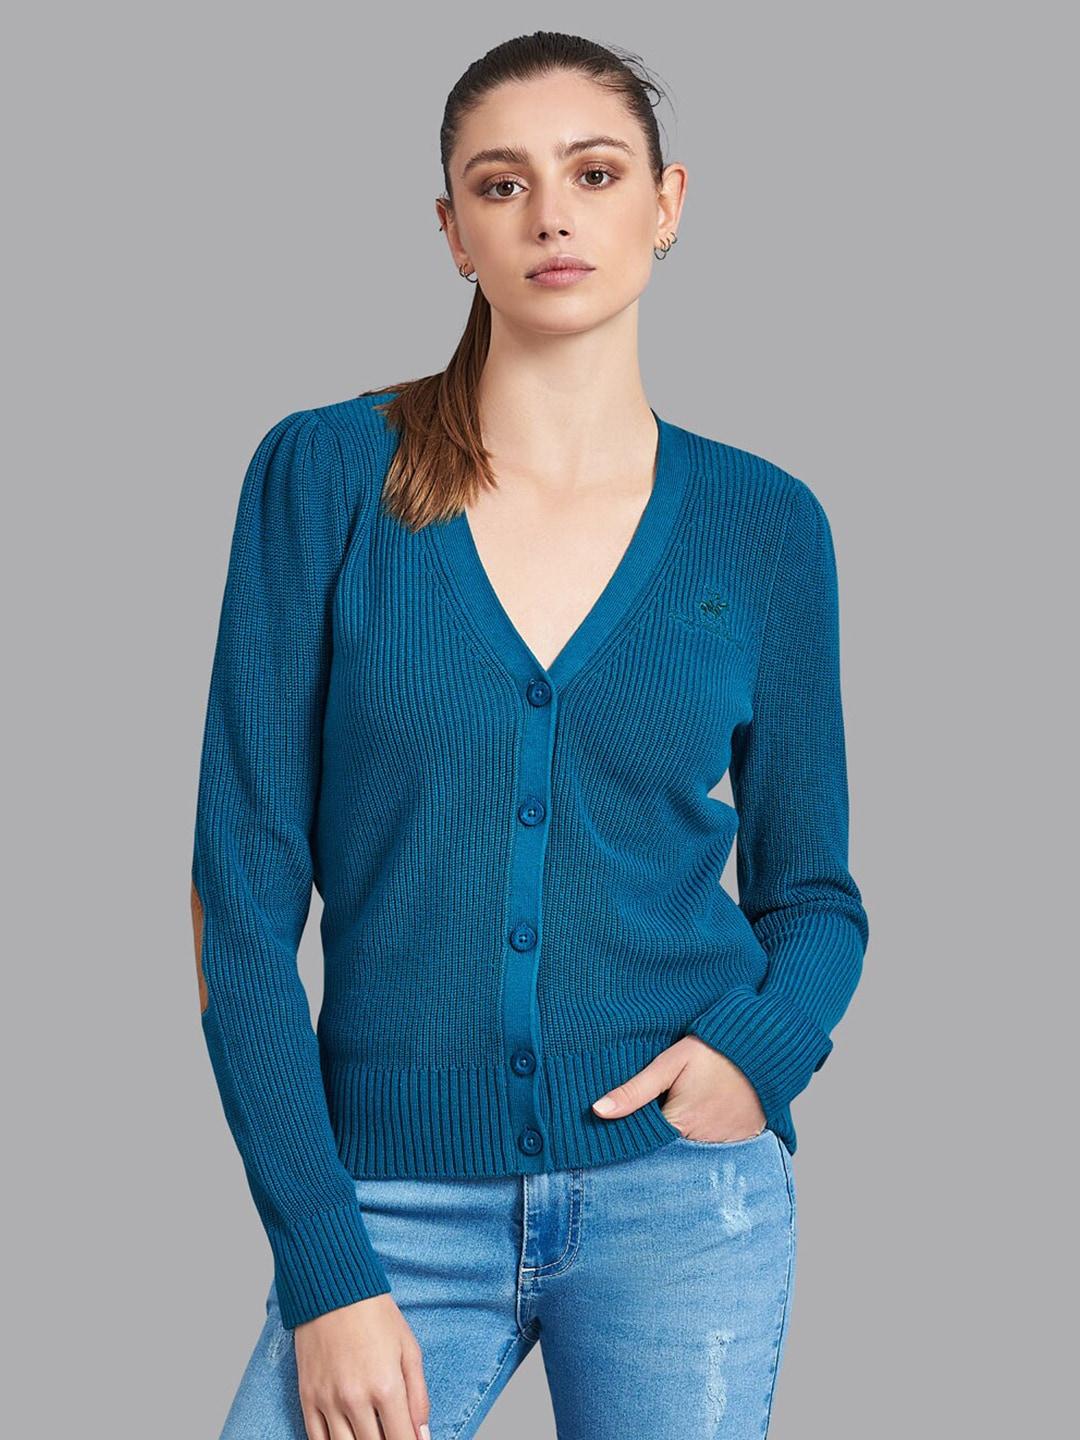 beverly-hills-polo-club-v-neck-ribbed-cotton-cardigan-sweaters